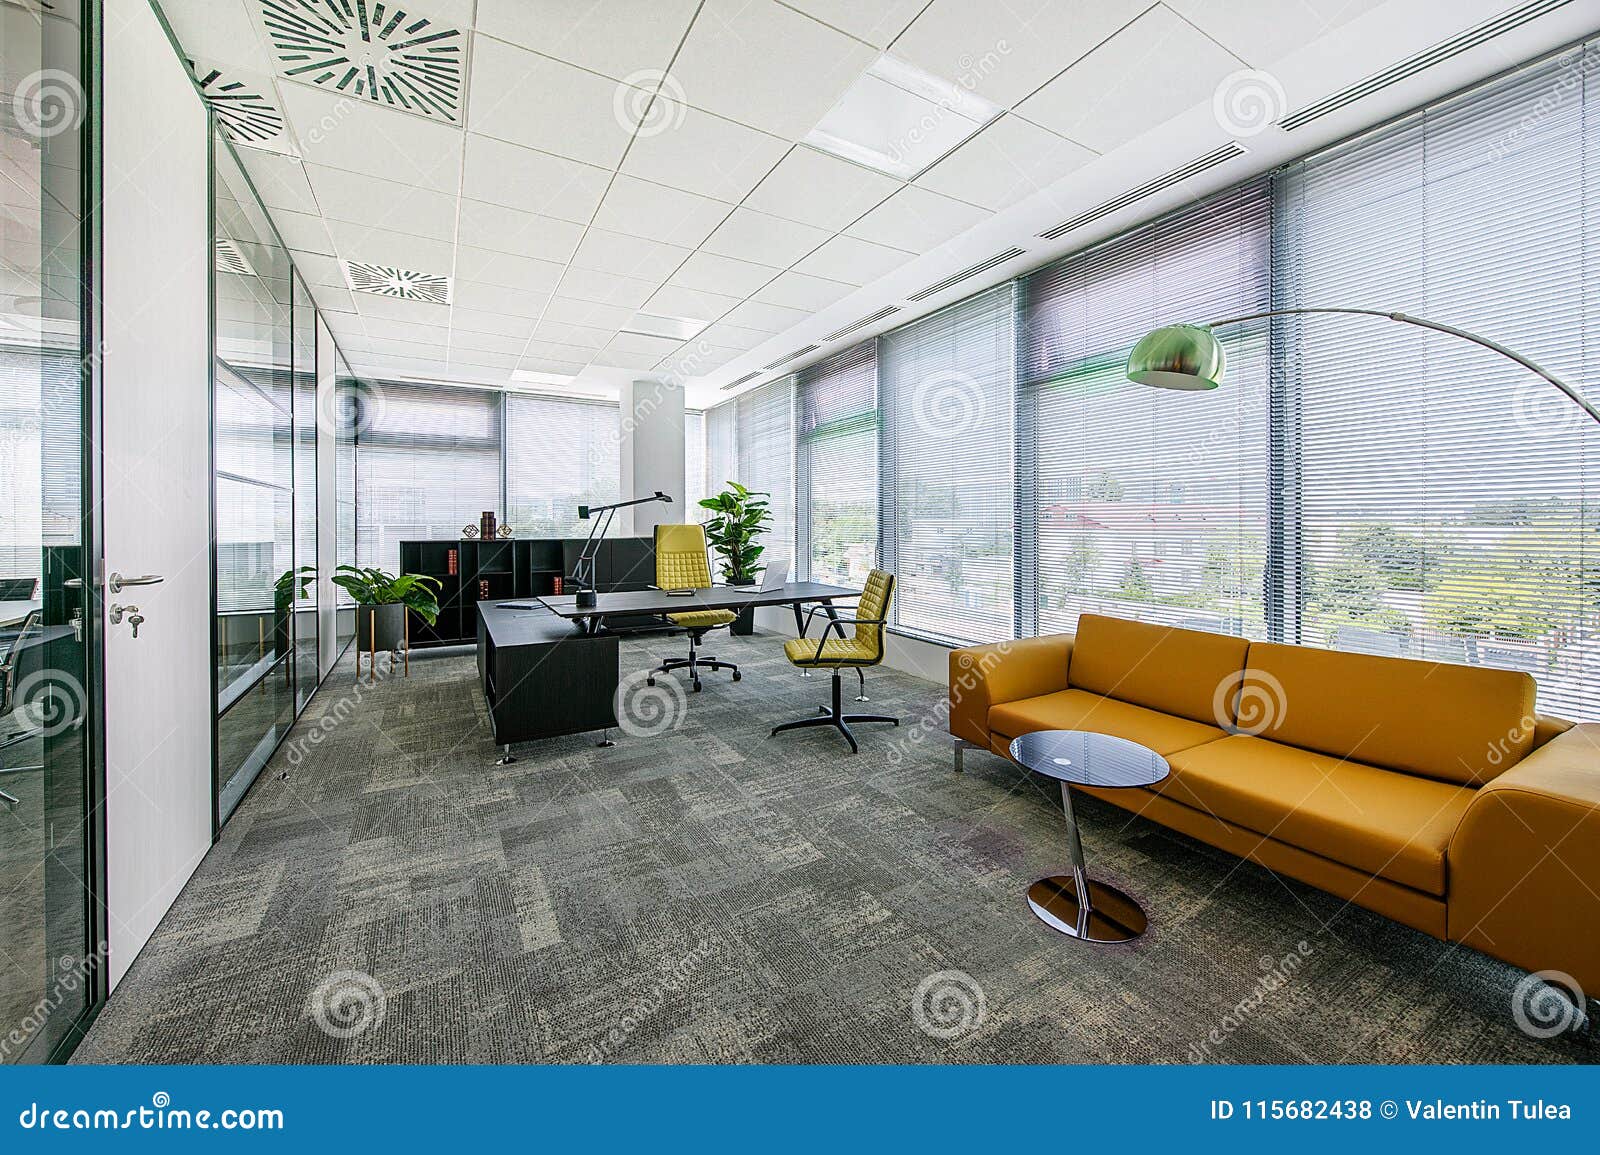 Small Modern Office Boardroom And Meeting Room Interior With